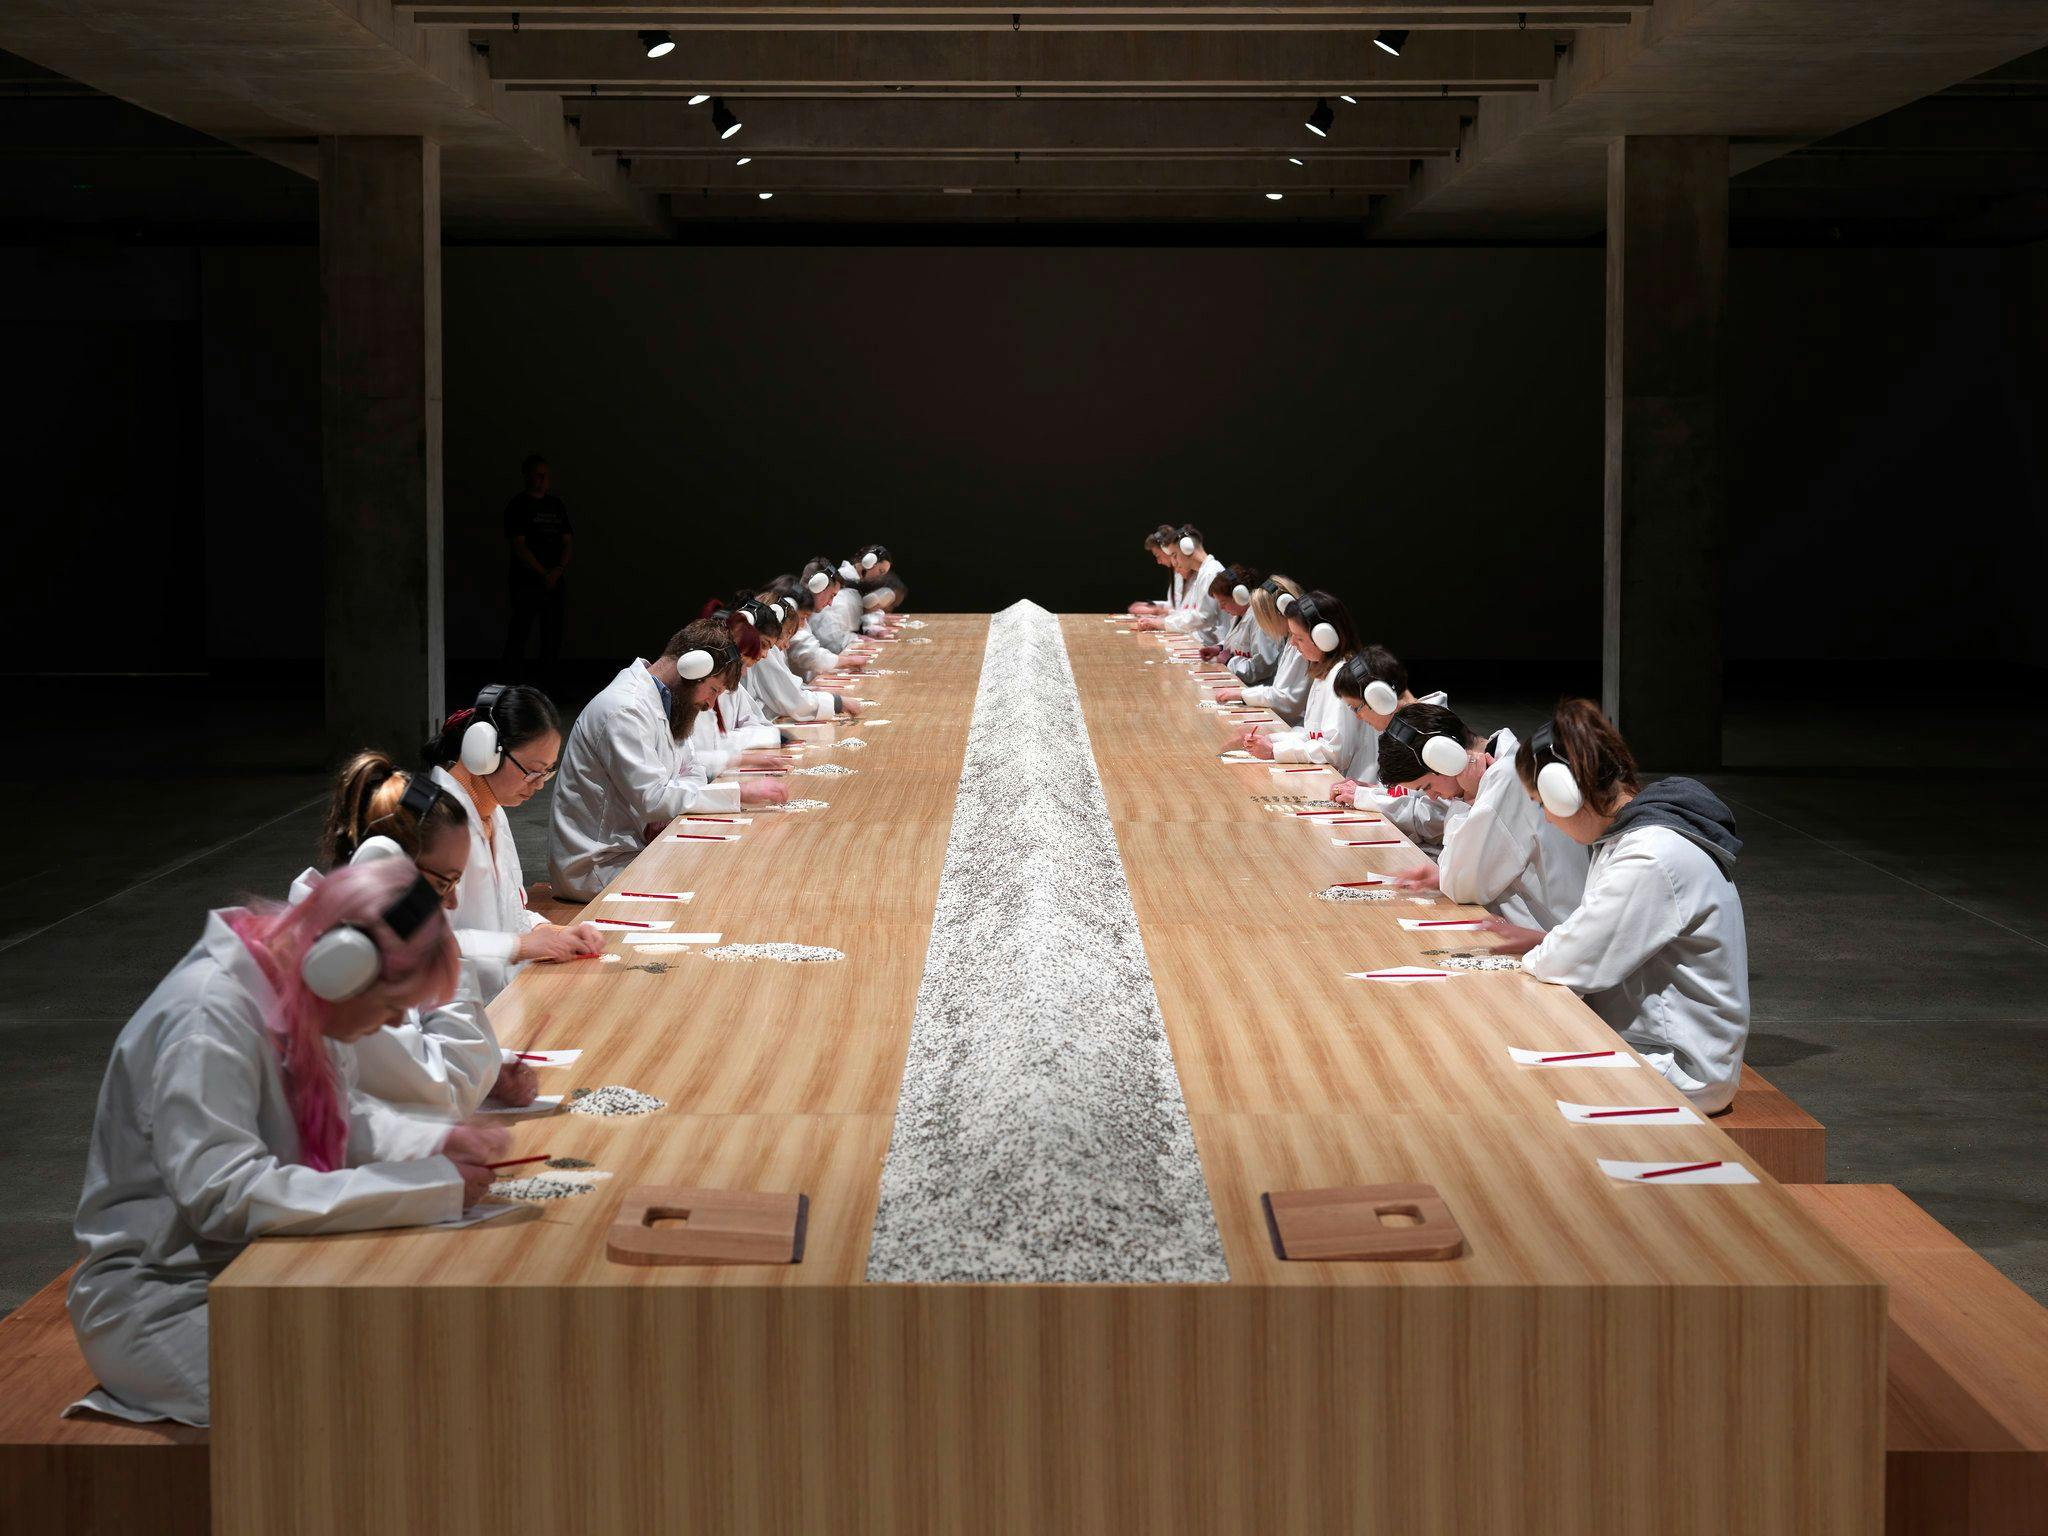 At a long table, a large line of heaped rice runs down the middle, dividing it into two sections. People sit on either side, each wearing headphones and separating black and white rice pieces.